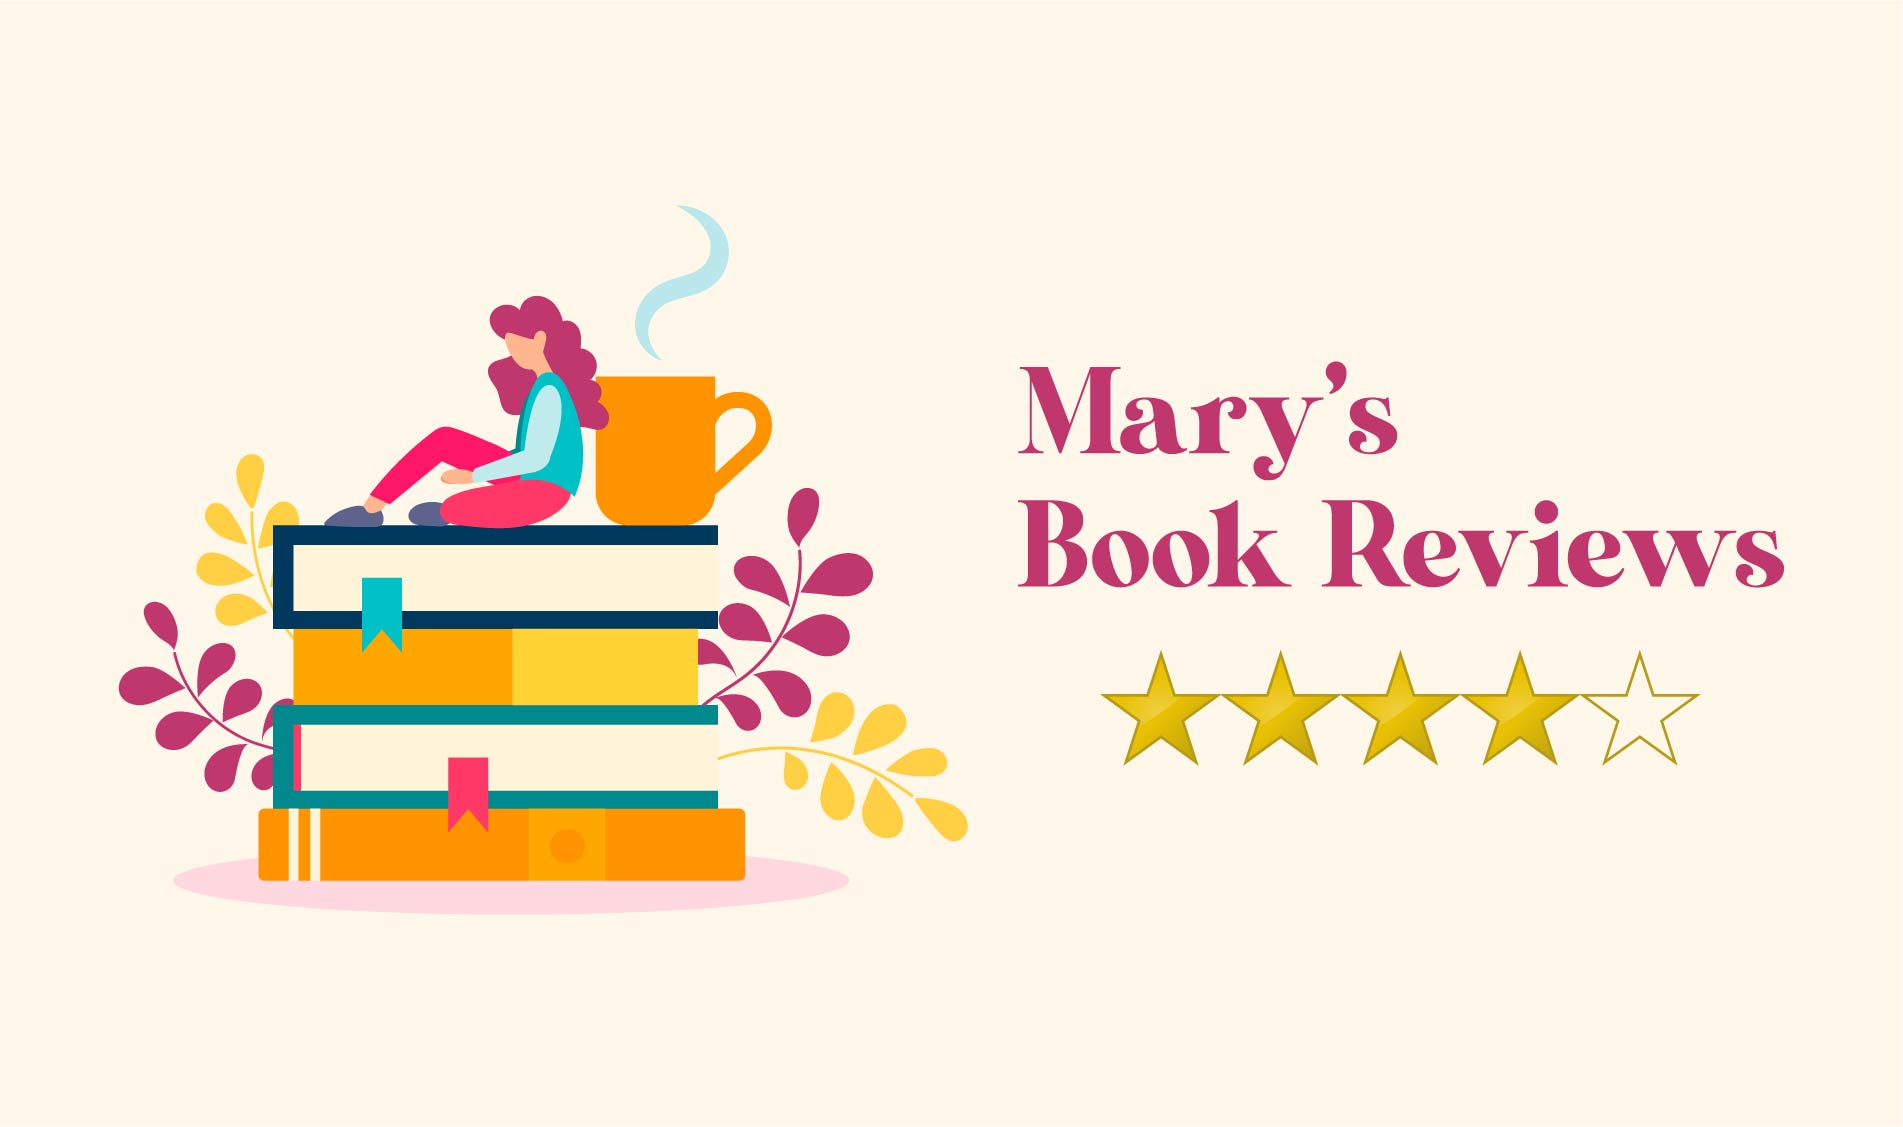 Mary's Book Reviews 4-Stars